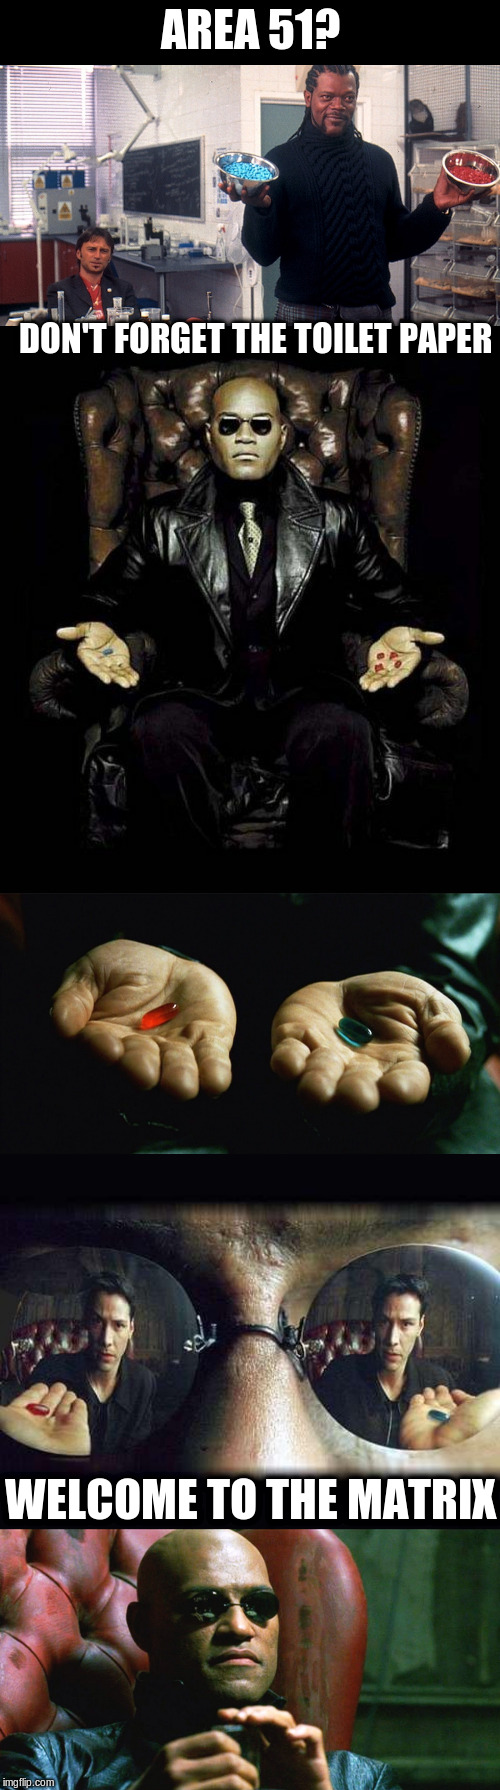 Area 51 ~ The 51st State |  AREA 51? DON'T FORGET THE TOILET PAPER; WELCOME TO THE MATRIX | image tagged in red pill blue pill,morpheus blue  red pill,laurence fishburne morpheus,the 51st state red pill or blue pill | made w/ Imgflip meme maker